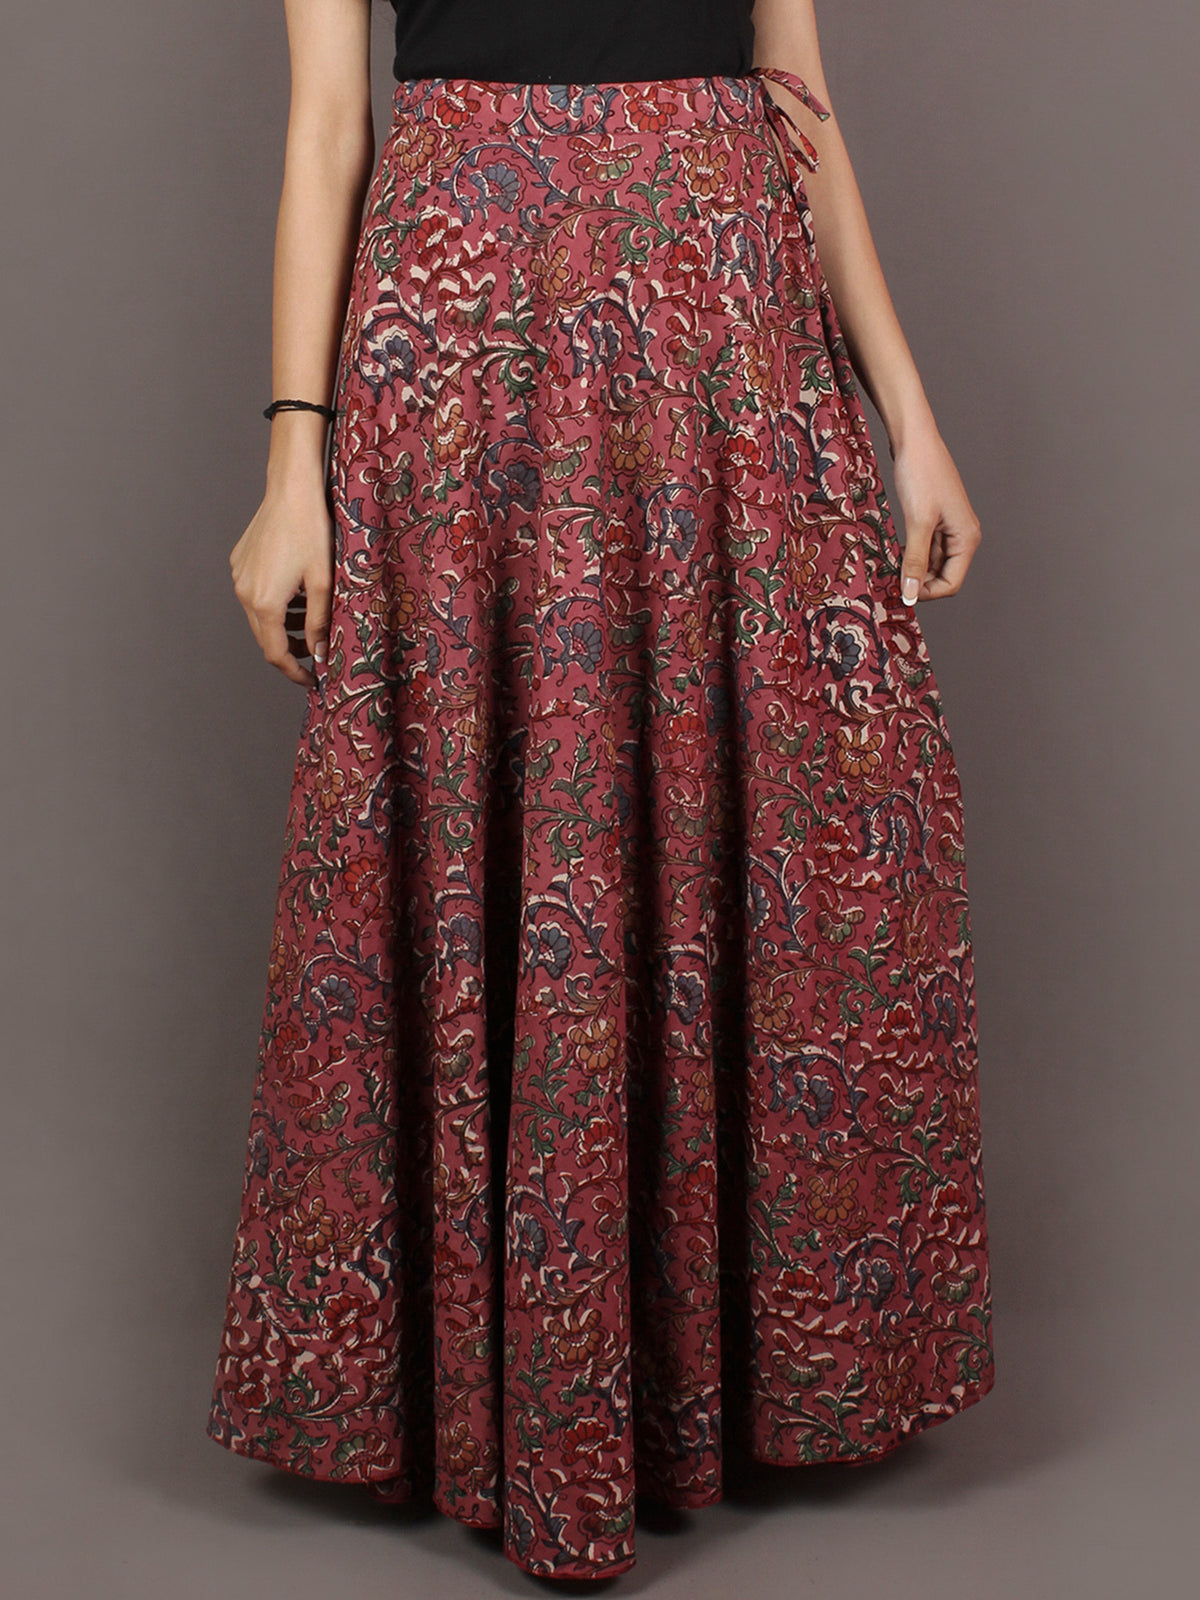 Hand Block Printed Wrap Around Skirt In Salmon Pink Multi Colour - S401001